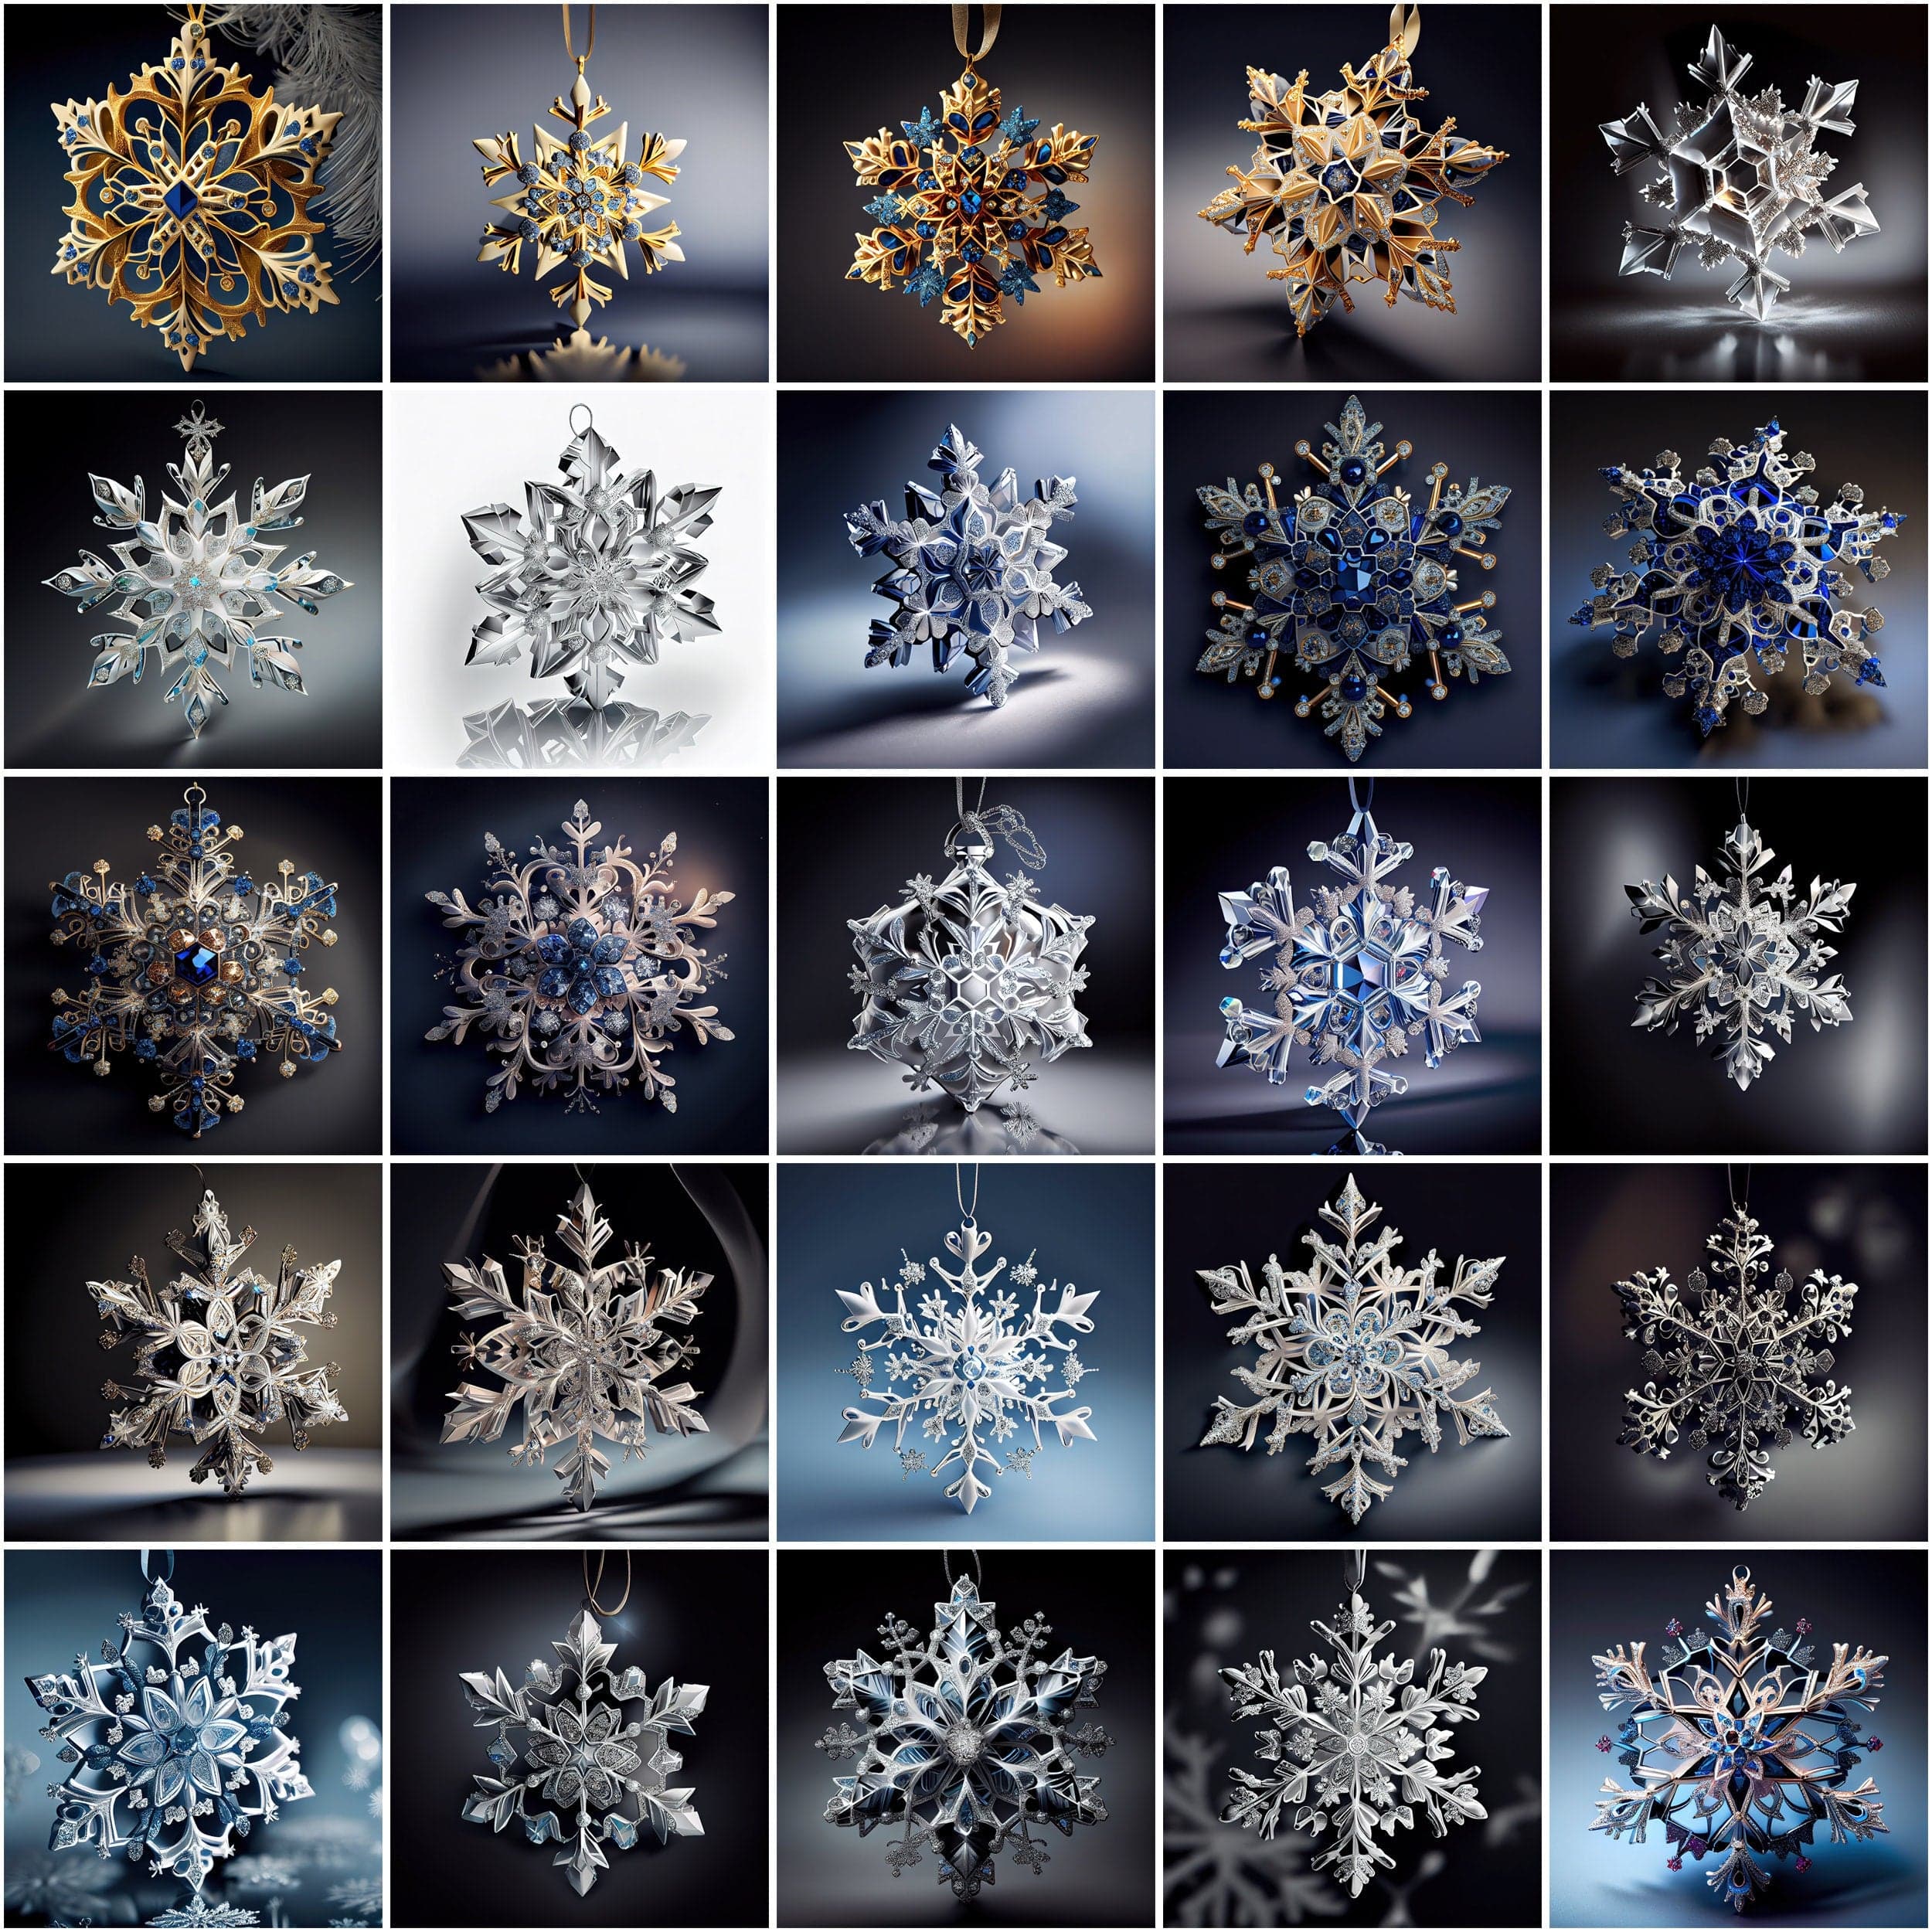 Download 170 Precious Snowflakes Clipart Images. Jewellery images with snowflakes, Commercial license Digital Download Sumobundle